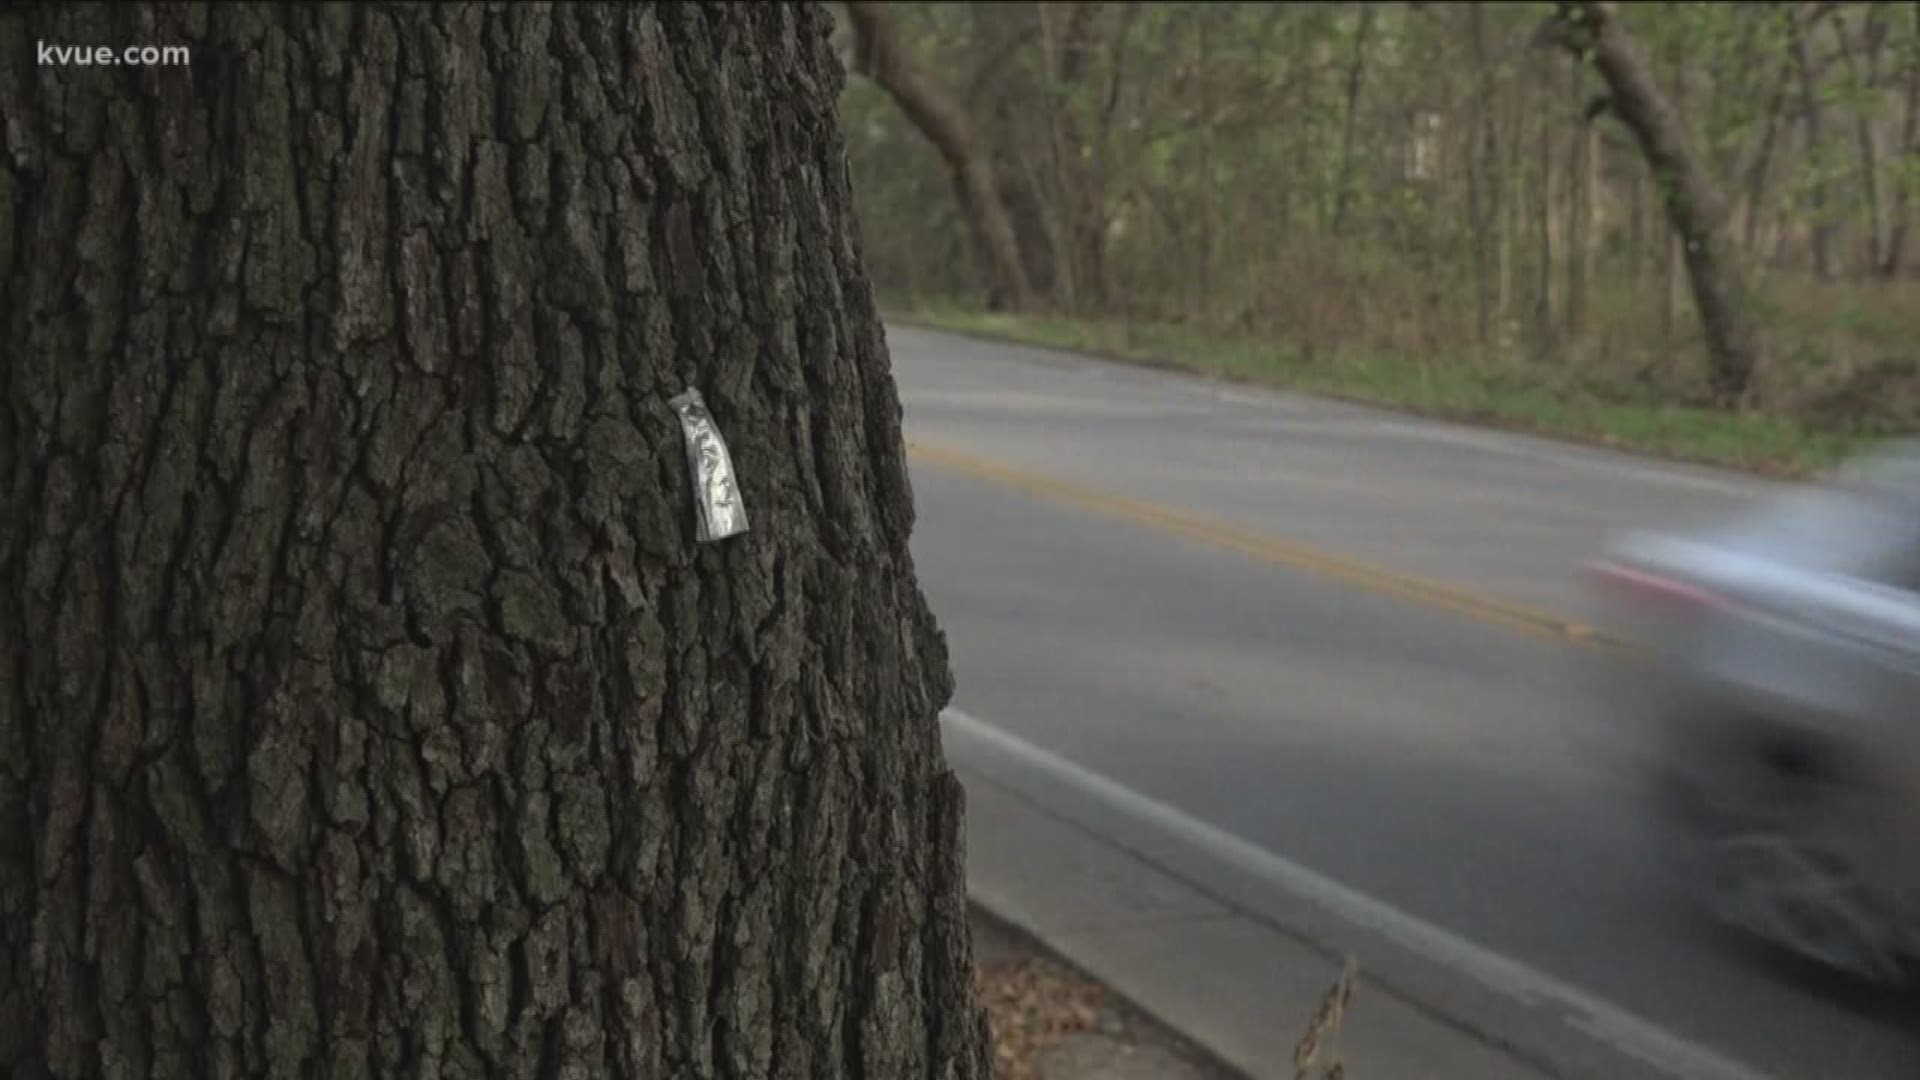 Since 2015, Williamson County has been trying to improve the safety of Hairy Man Road/Brushy Creek Road. Soon, they will post a bid to remove 104 trees on the road.